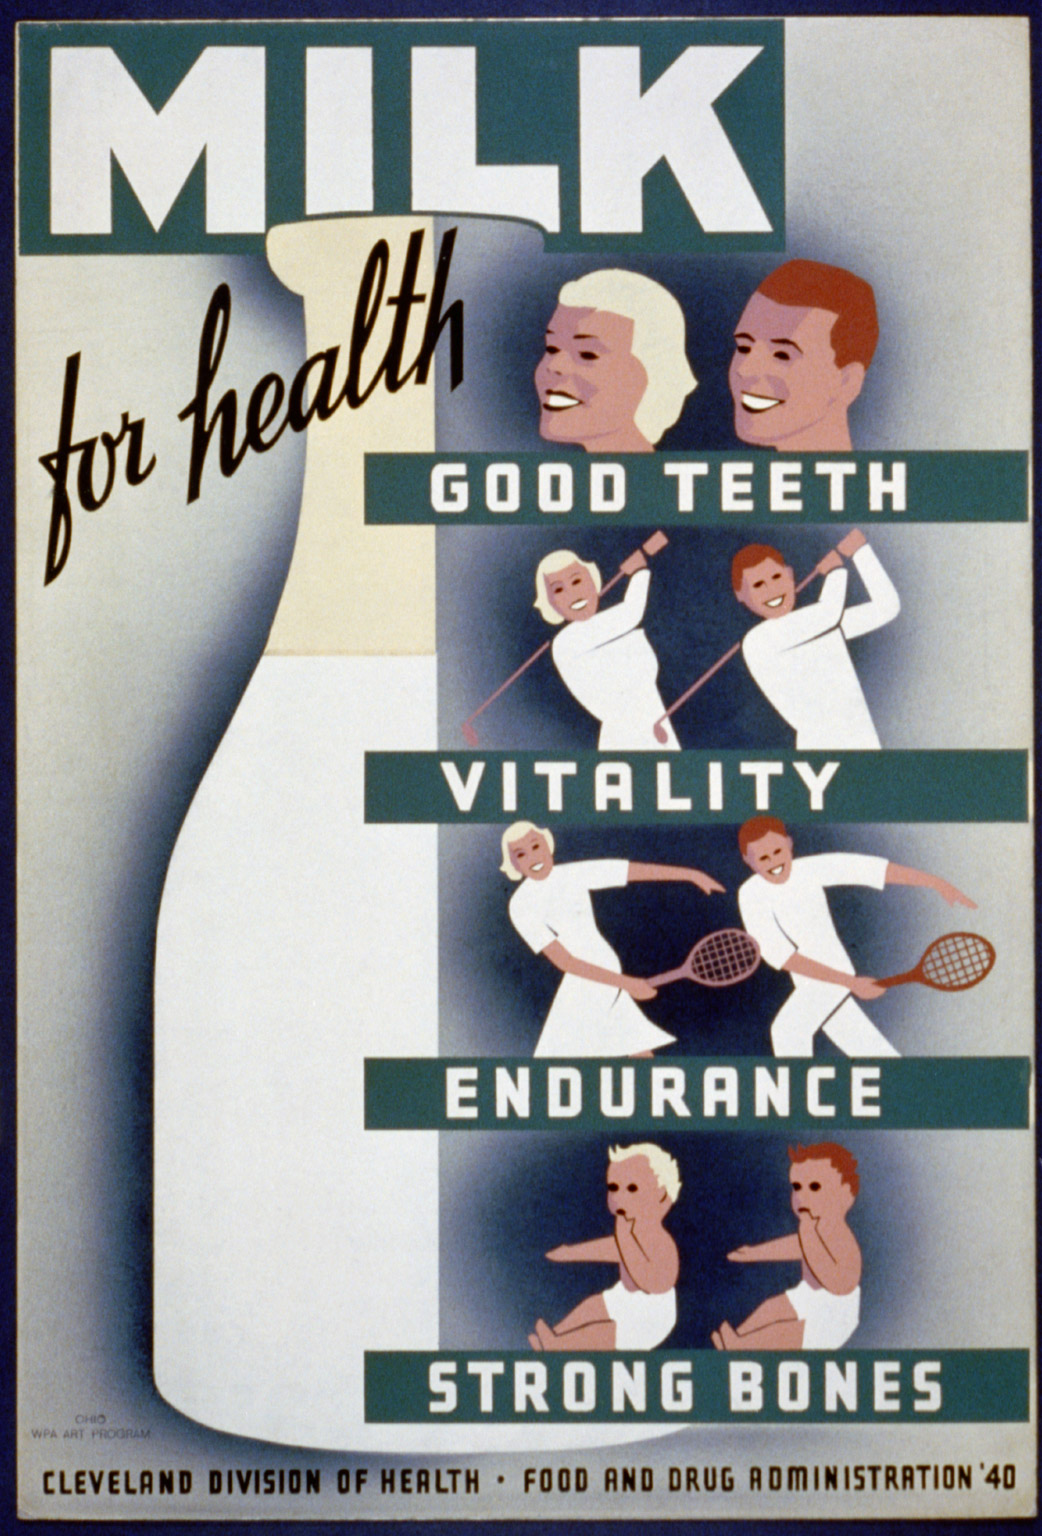 Health posters from the WPA, Works Progress Administration